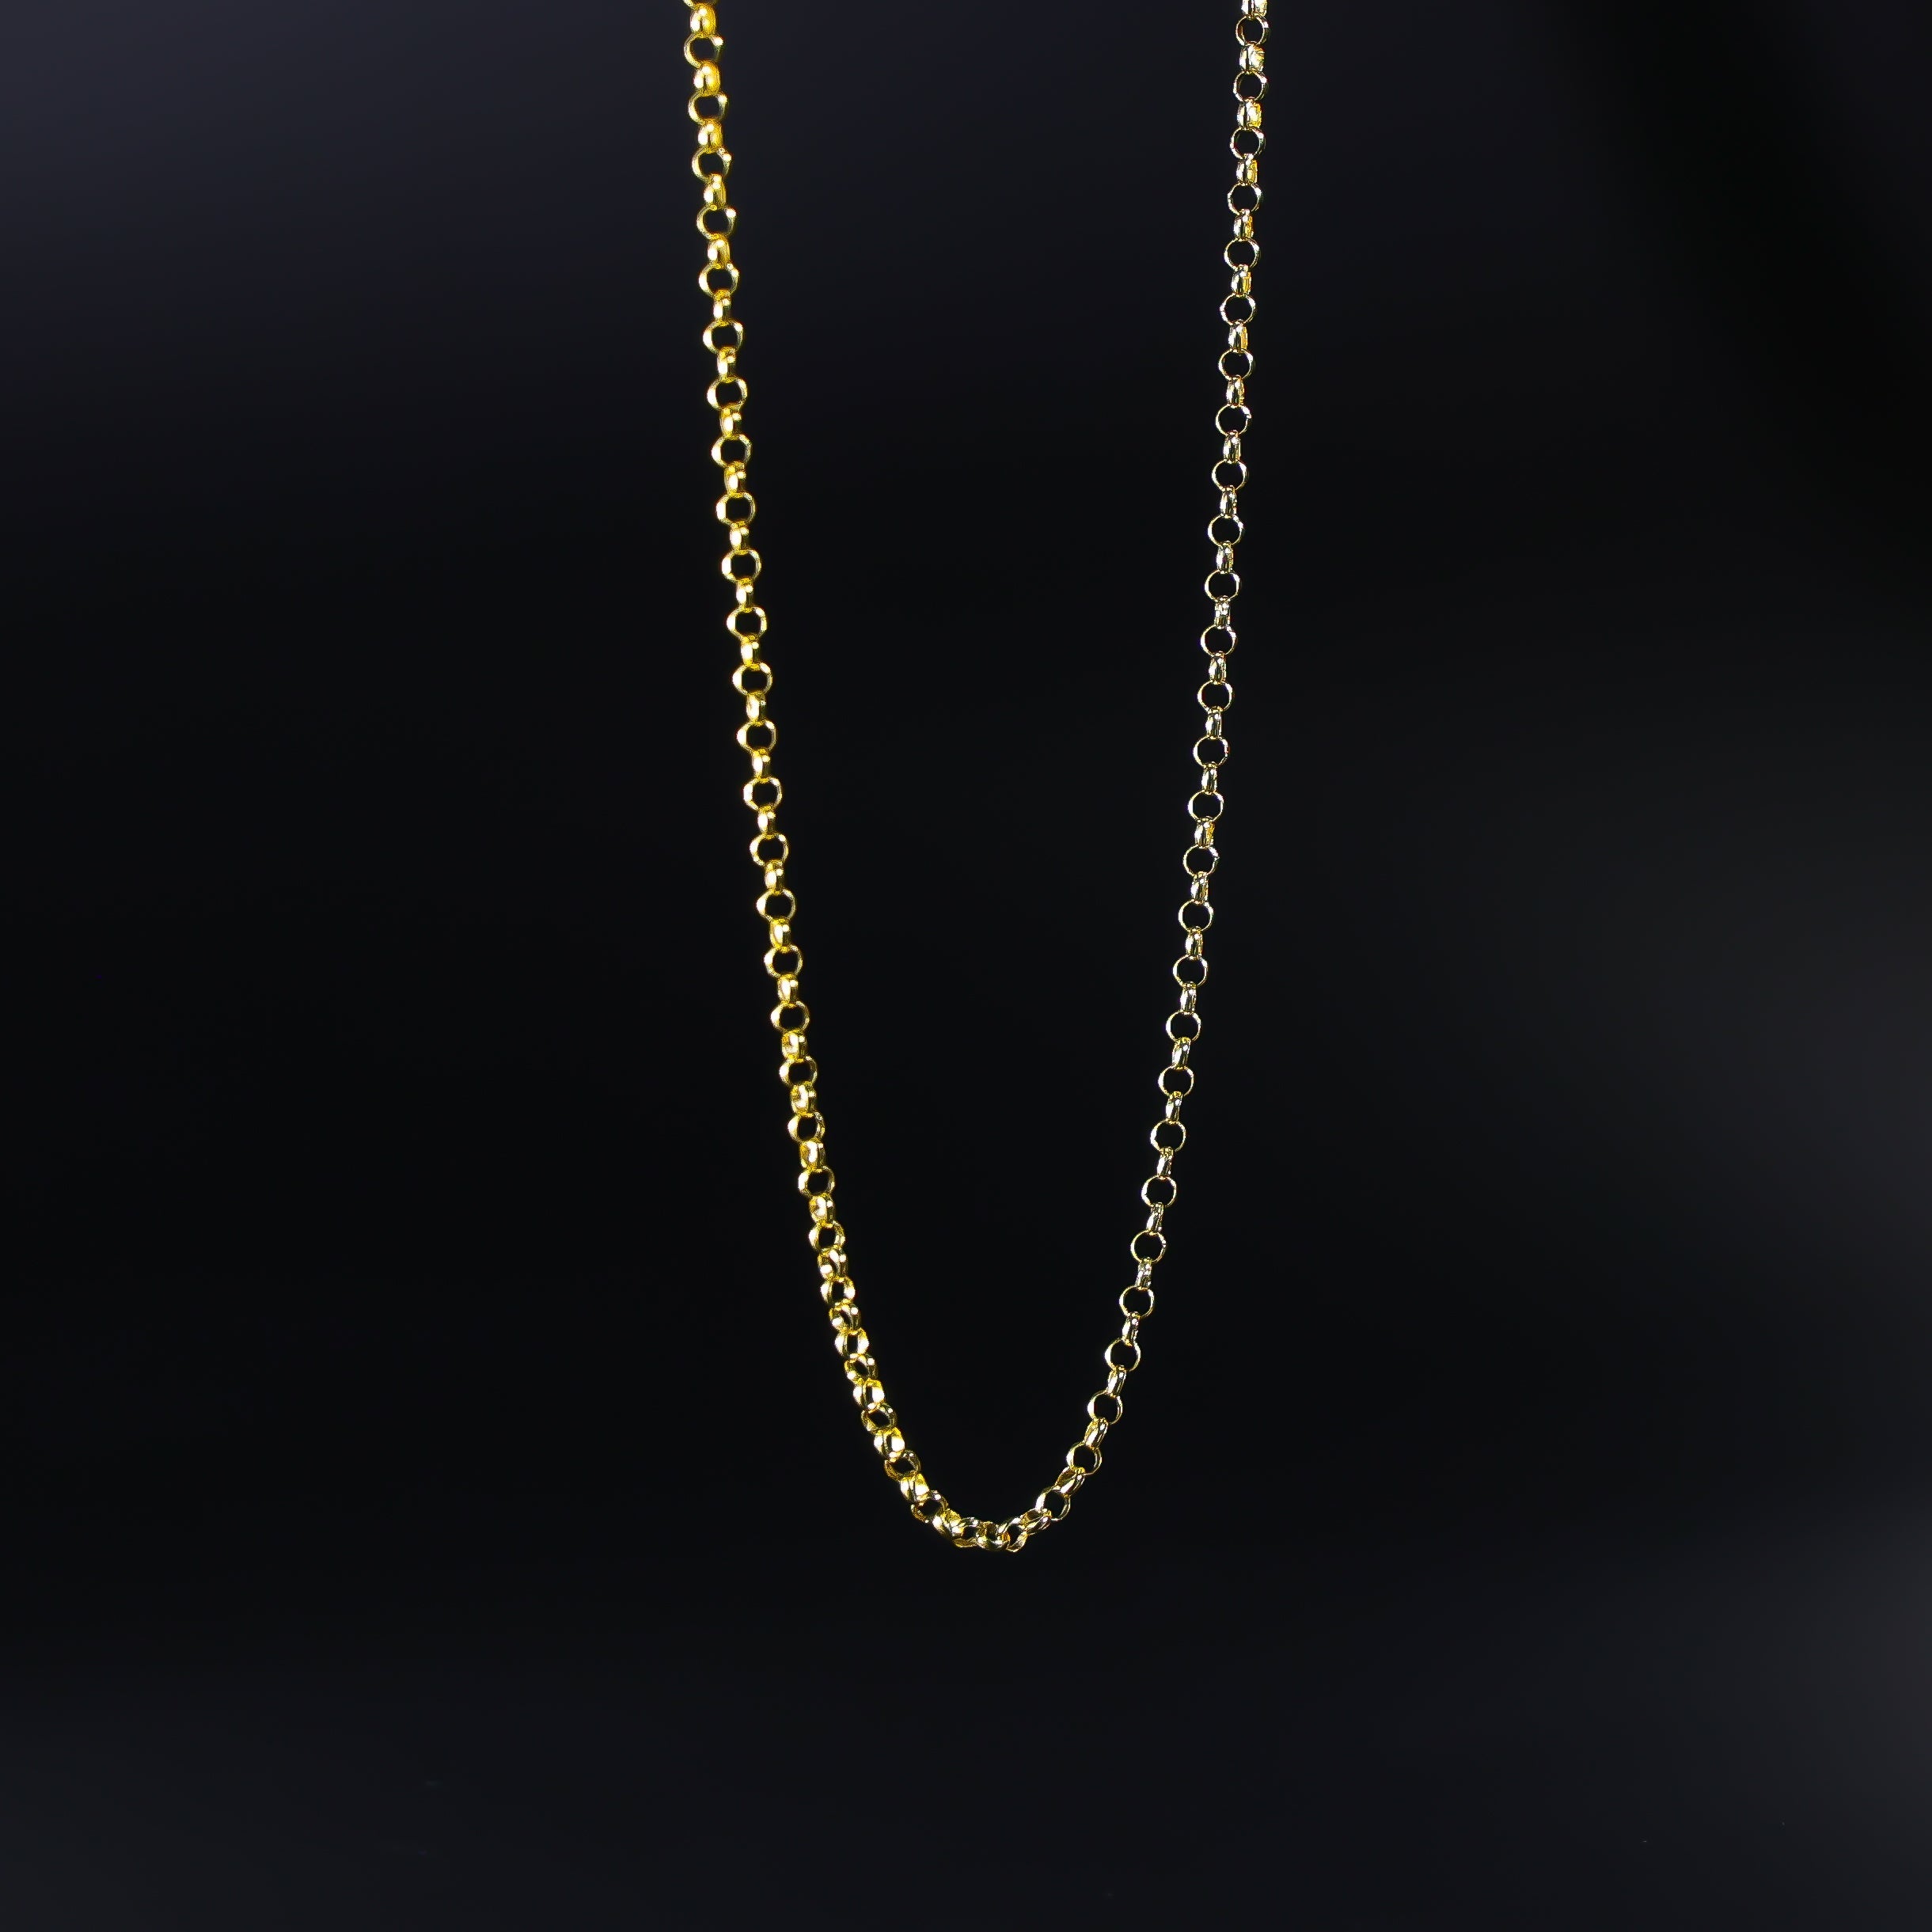 2.1mm 14k Gold Round Rolo Cable Chain Model-0225 - Charlie & Co. Jewelry